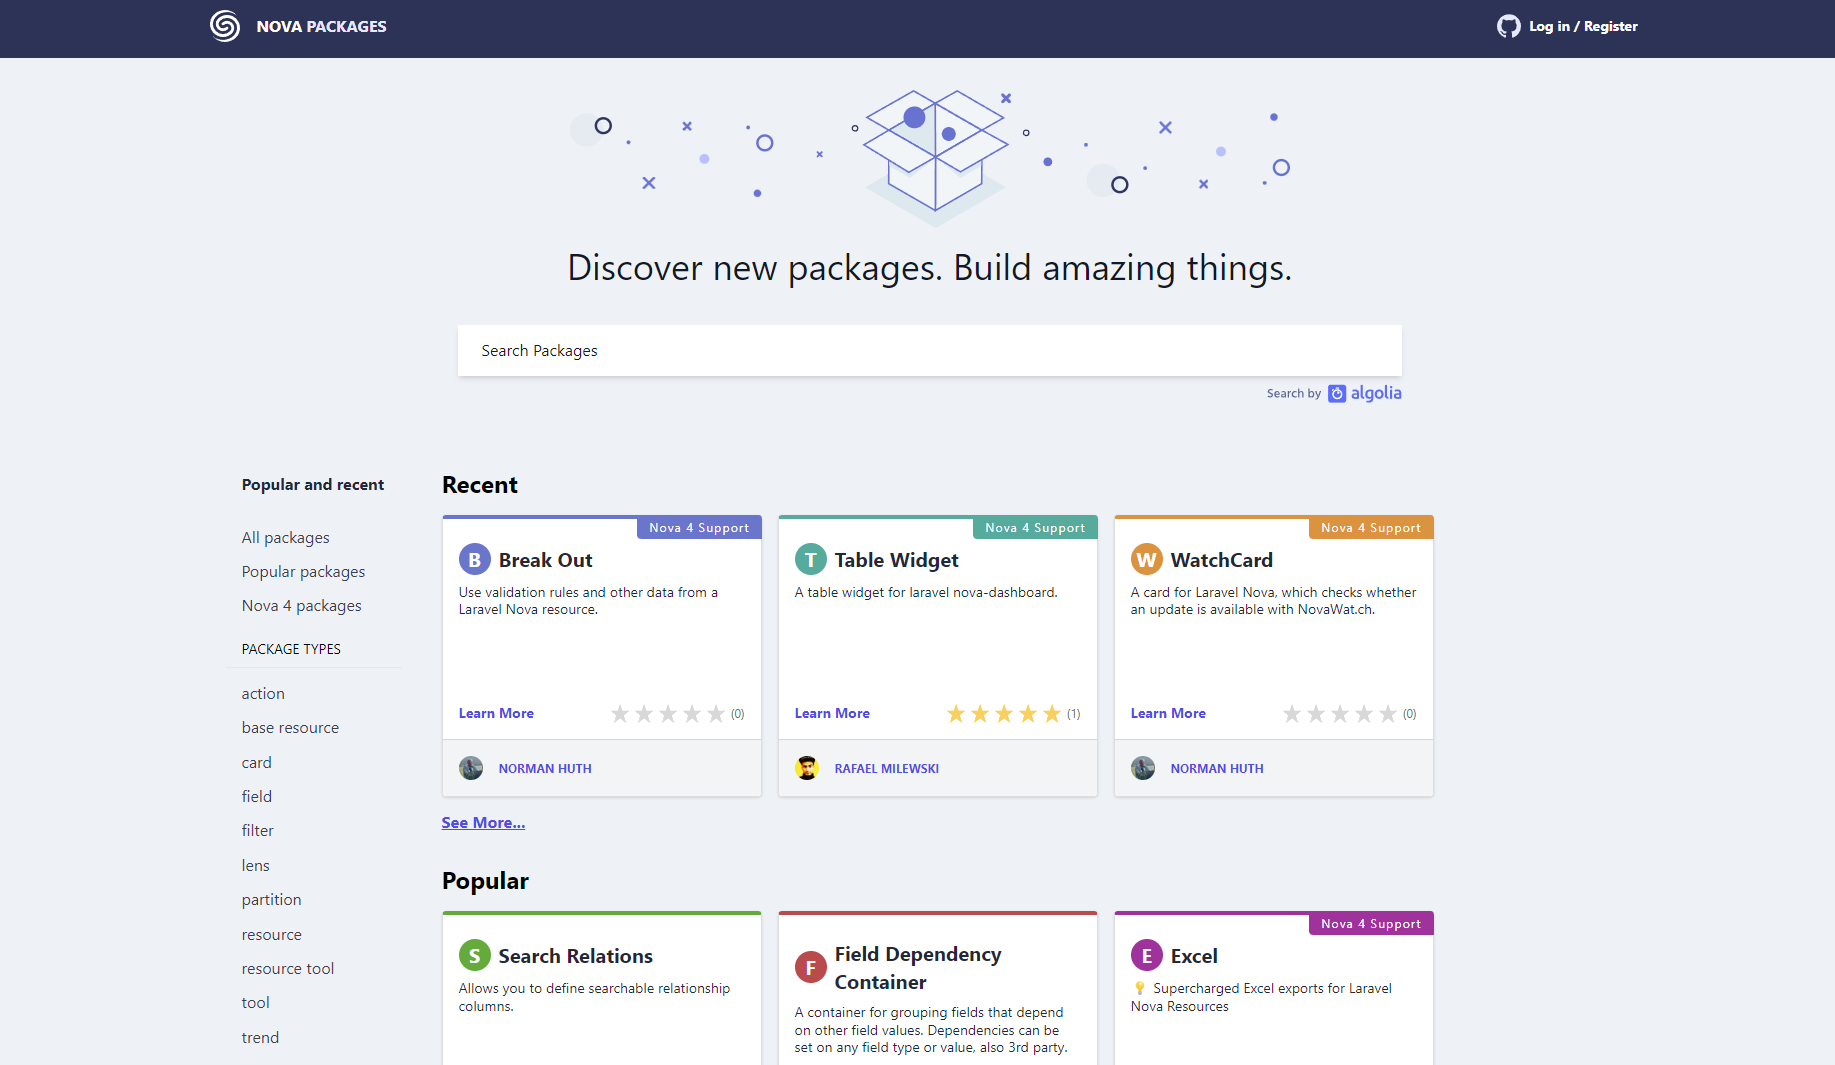 Nova Packages is another example of a TALL Stack website.